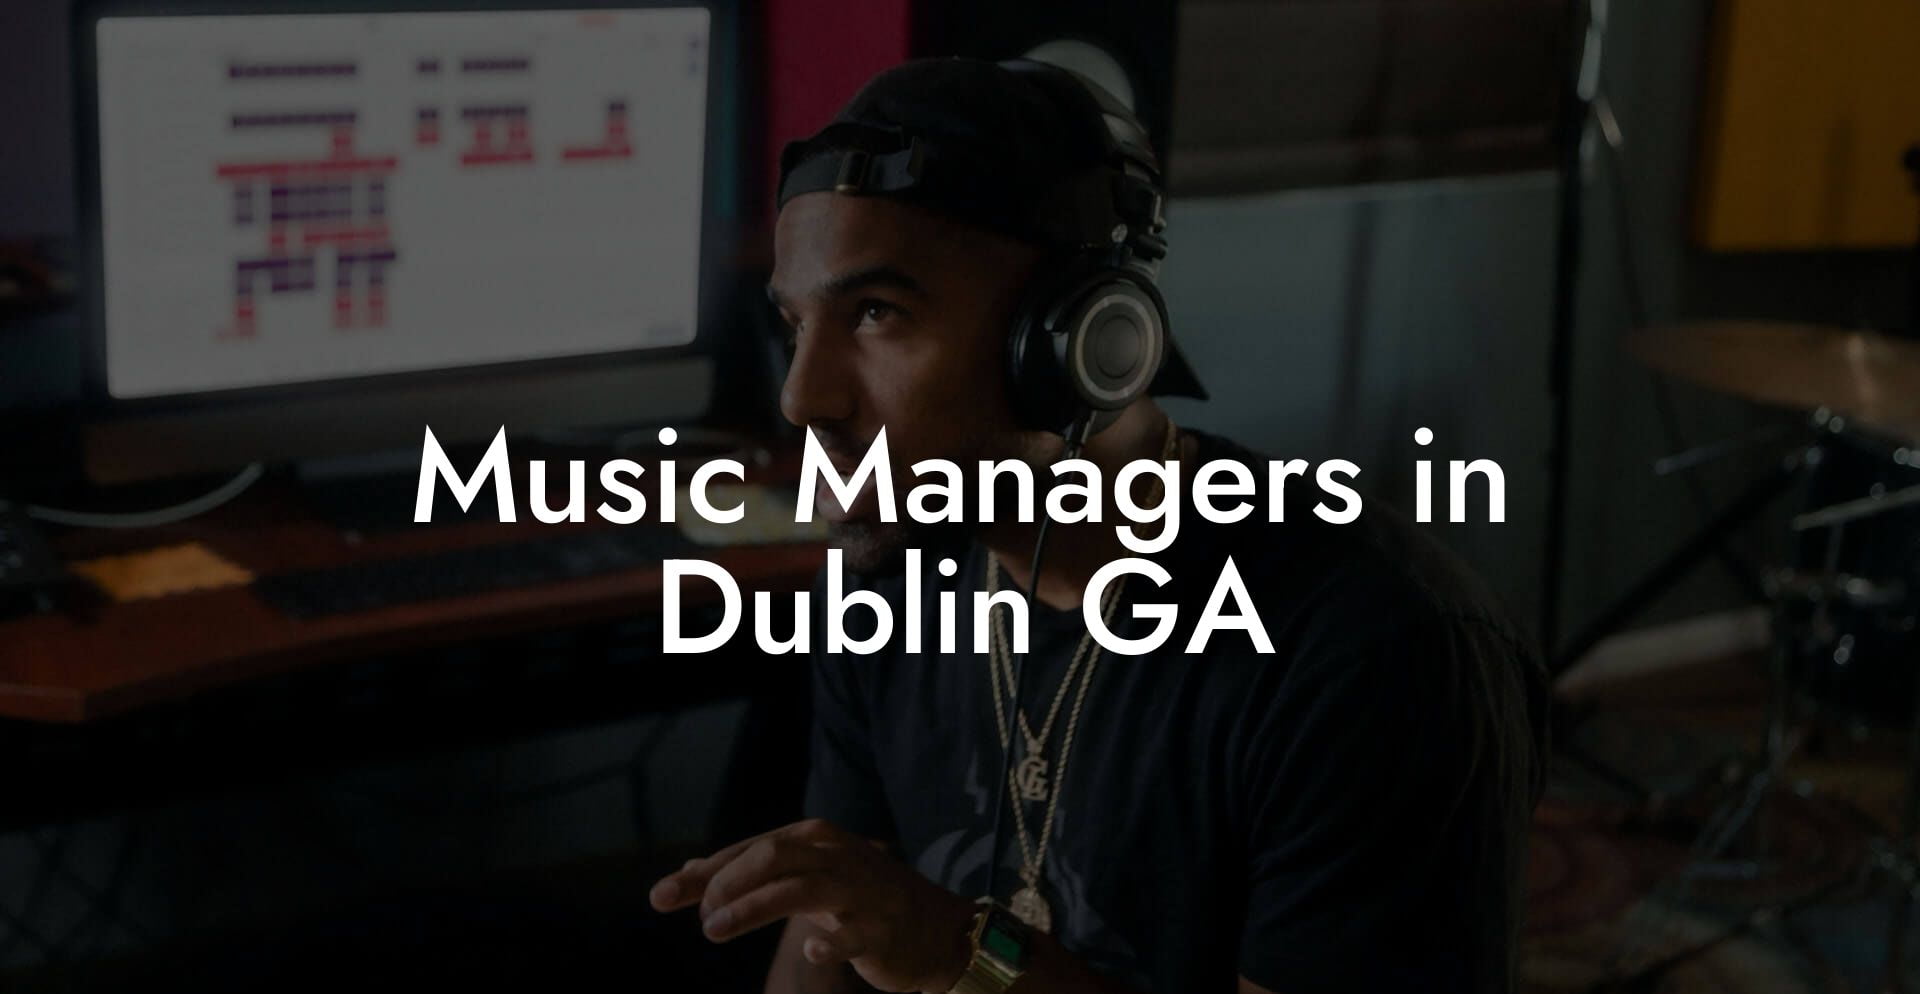 Music Managers in Dublin GA